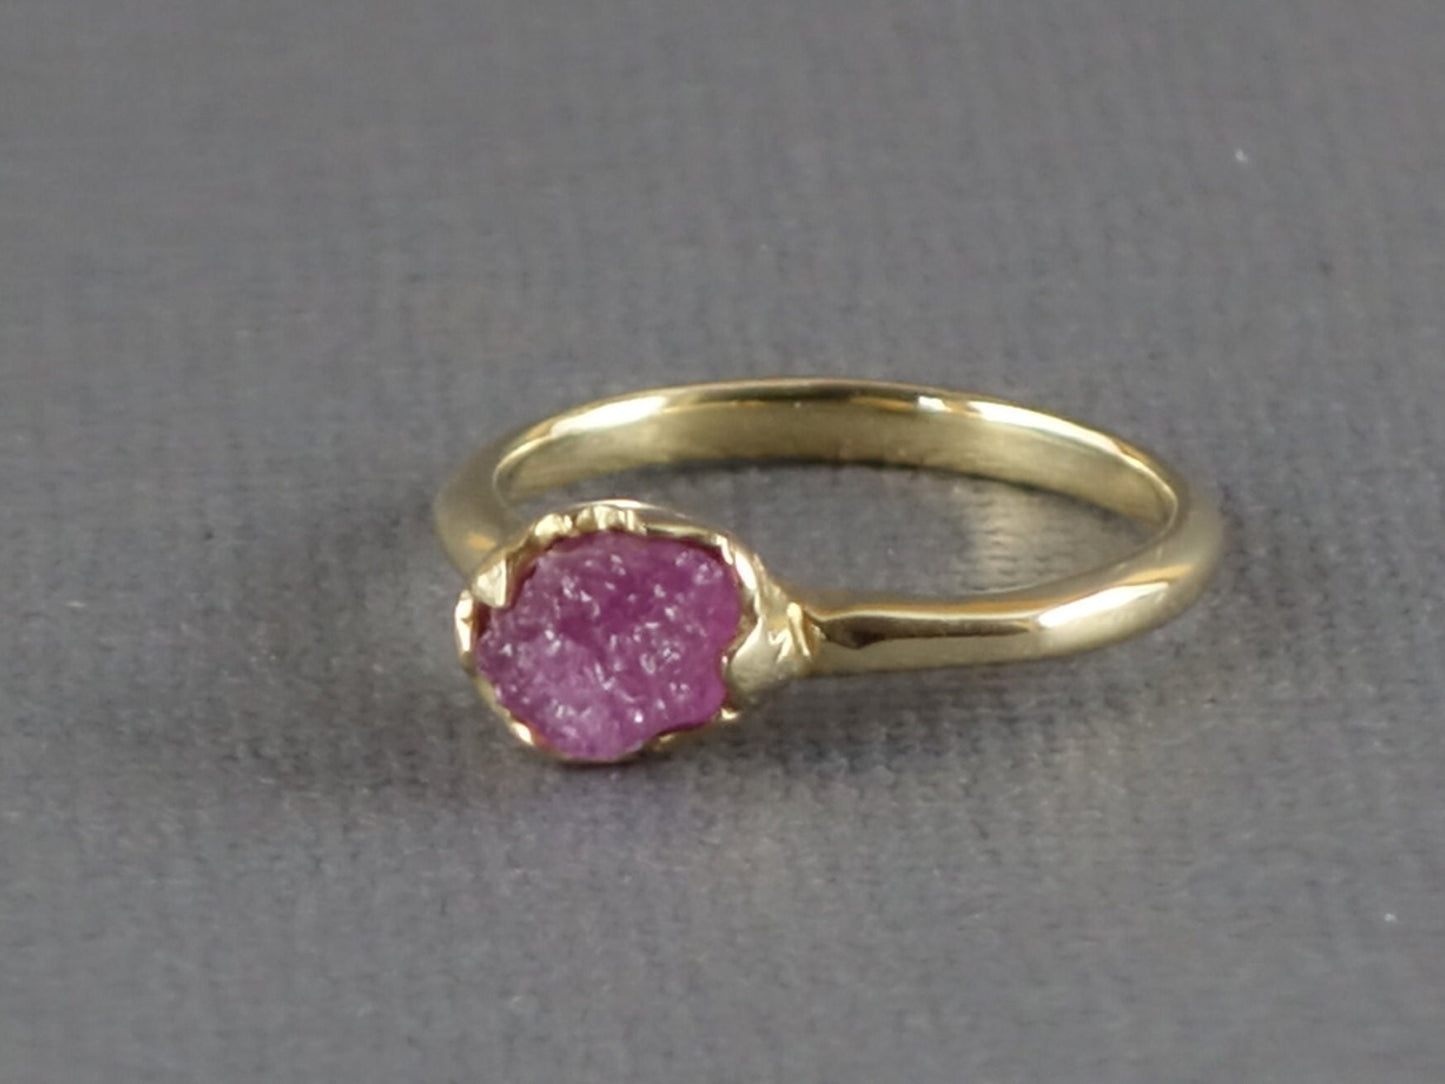 Raw Sapphire Ring, Raw Pink Sapphire Ring, Gold Sapphire Ring, Raw Pink Sapphire and Gold Ring, Uncut Sapphire Ring, Uncut Gemstone ring